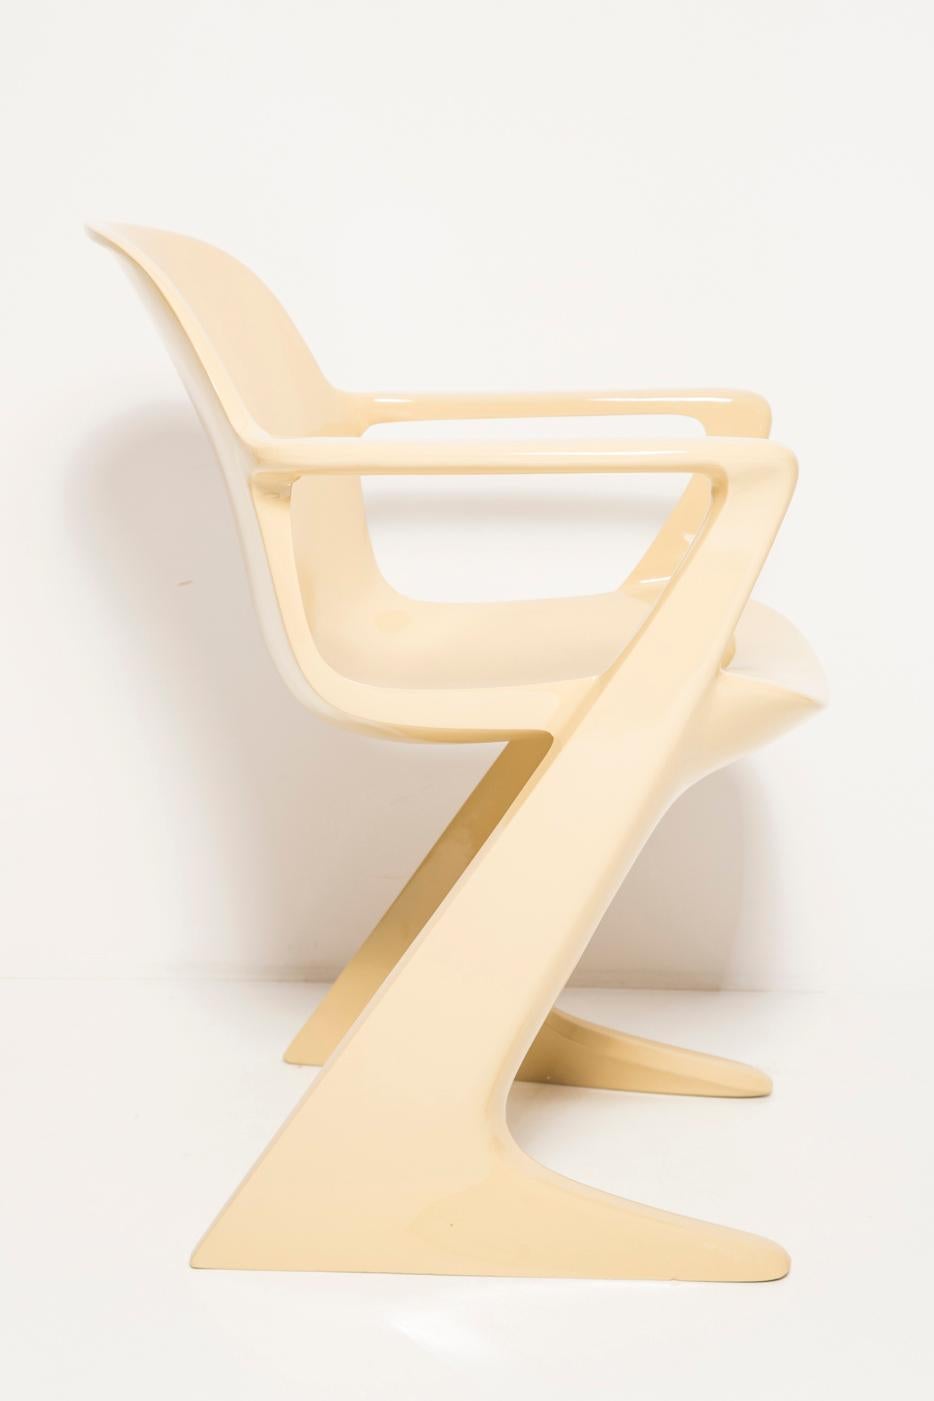 Fiberglass Set of Eight Beige Kangaroo Chairs, by Ernst Moeckl, Germany, 1968 For Sale